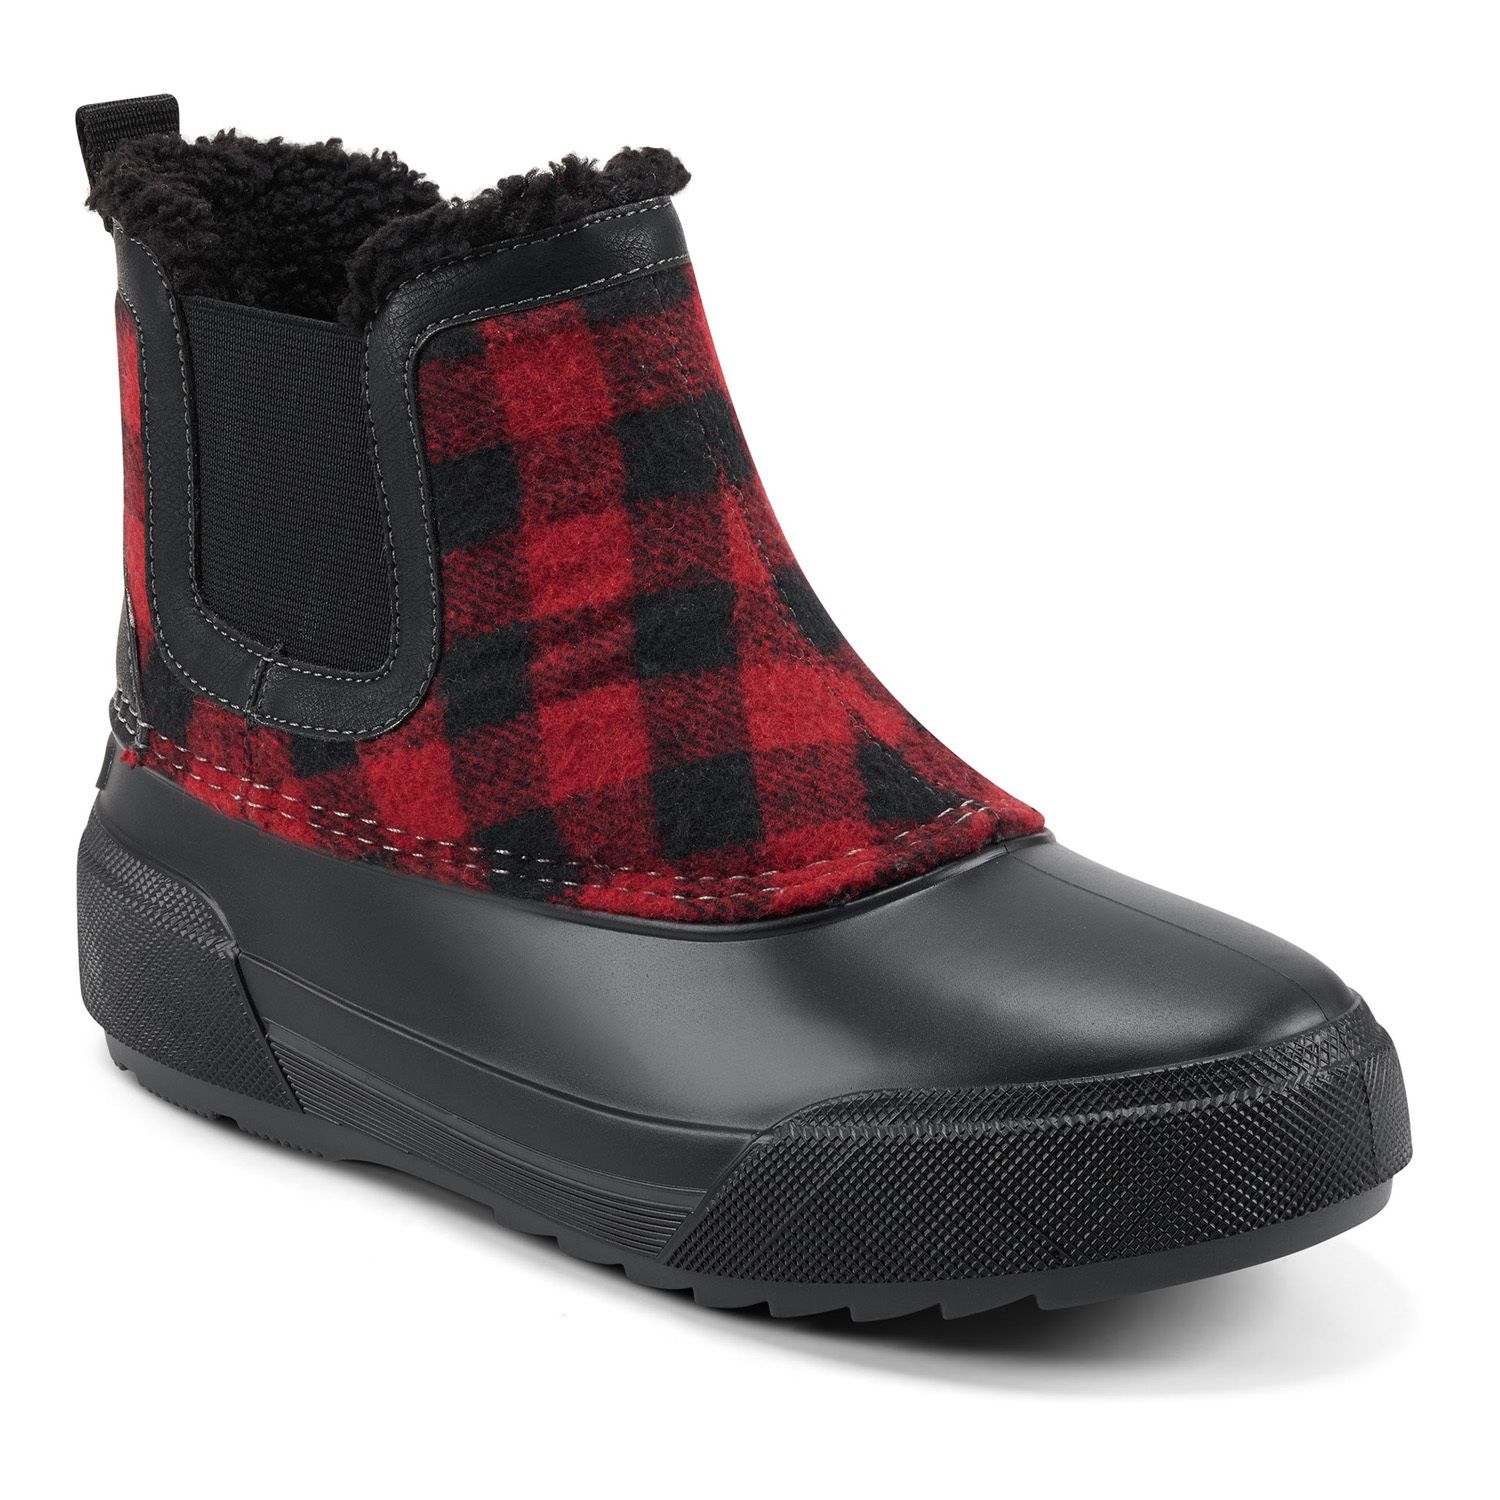 Image for Easy Spirit Icicles Women's Waterproof Snow Boots at Kohl's.